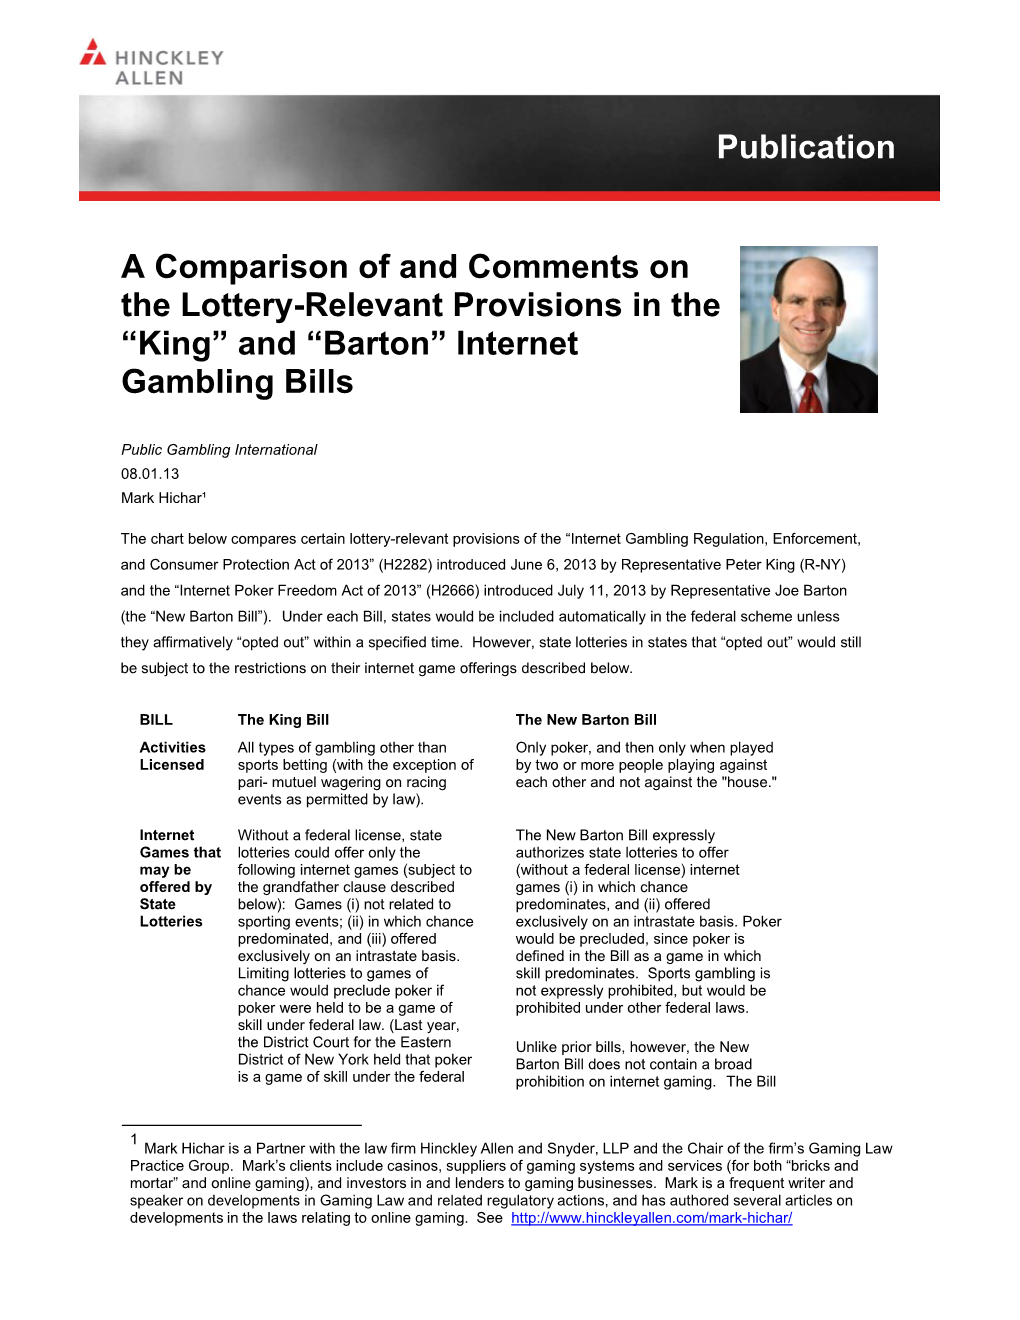 A Comparison of and Comments on the Lottery-Relevant Provisions in the “King” and “Barton” Internet Gambling Bills